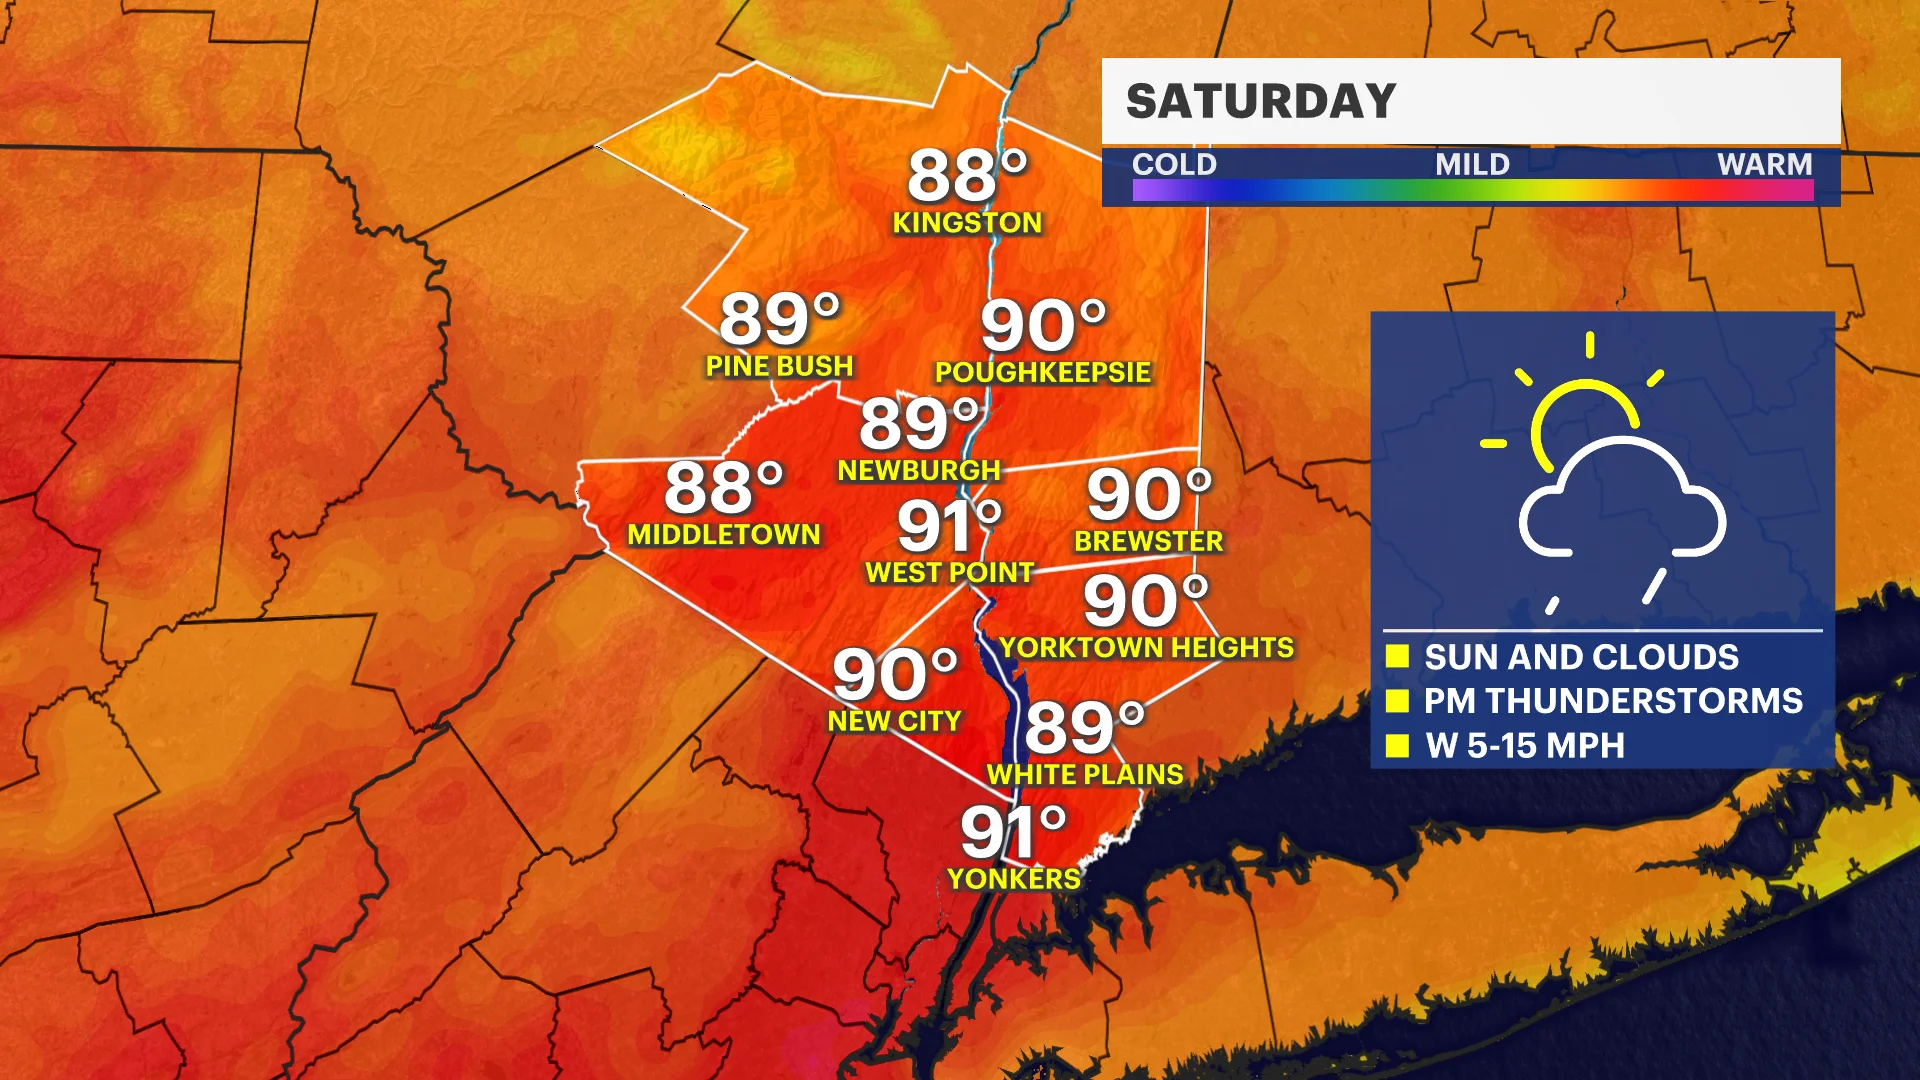 STORM WATCH: Extreme heat continues for the Hudson Valley with scattered storms throughout the weekend